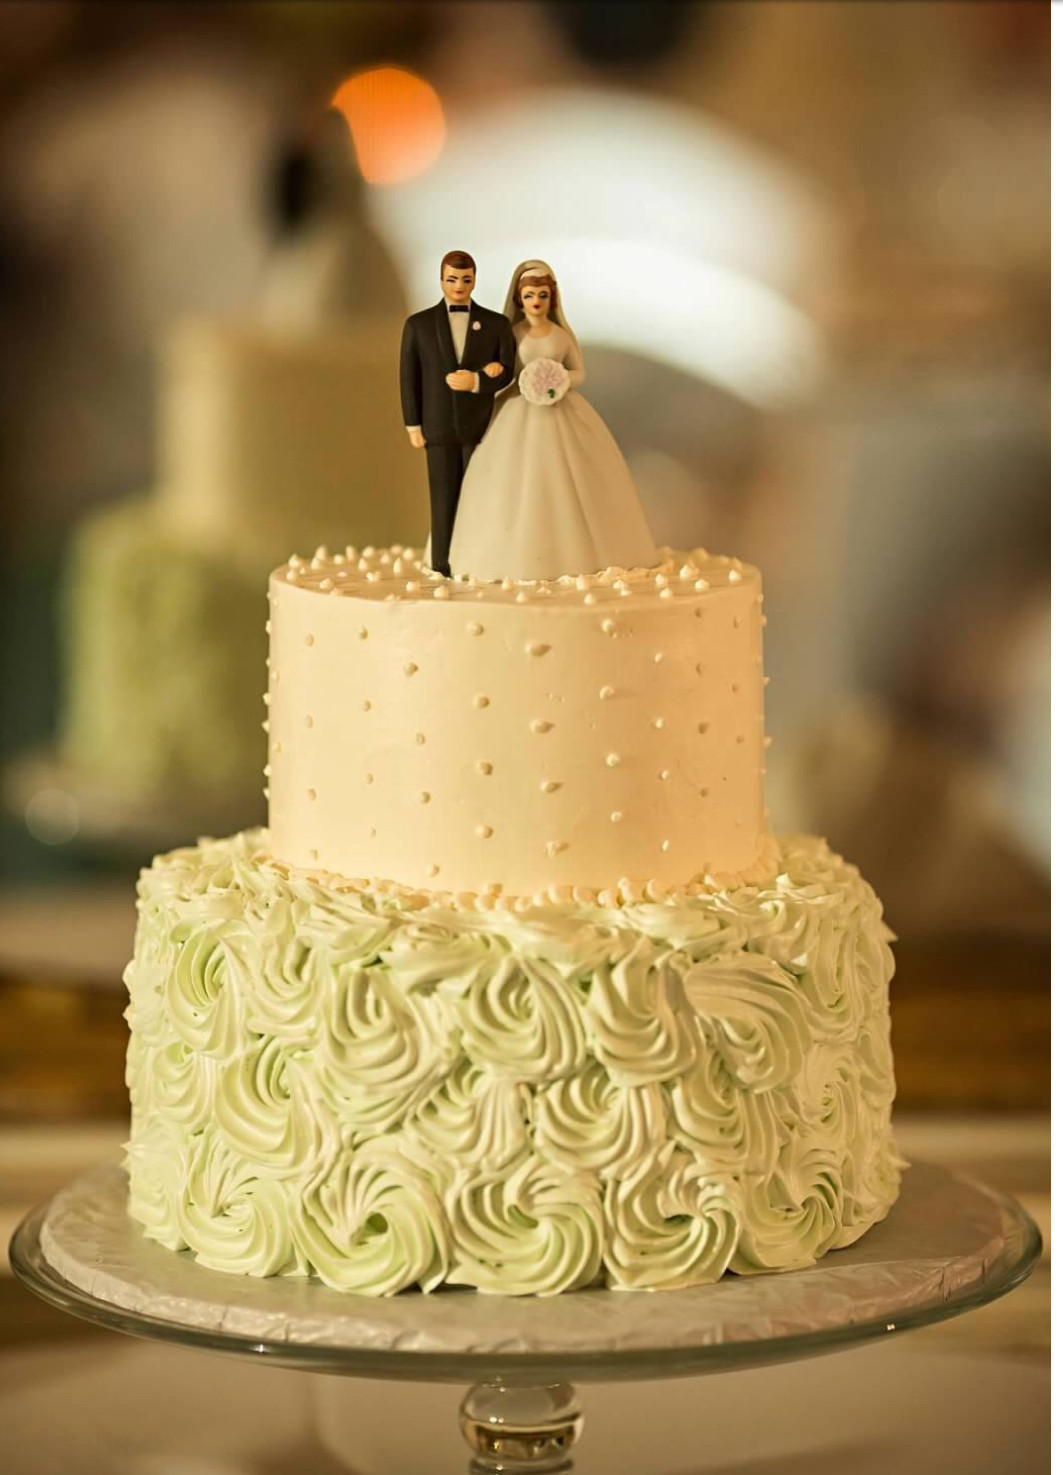 Show Me Pictures Of Wedding Cakes
 Show me your wedding cakes